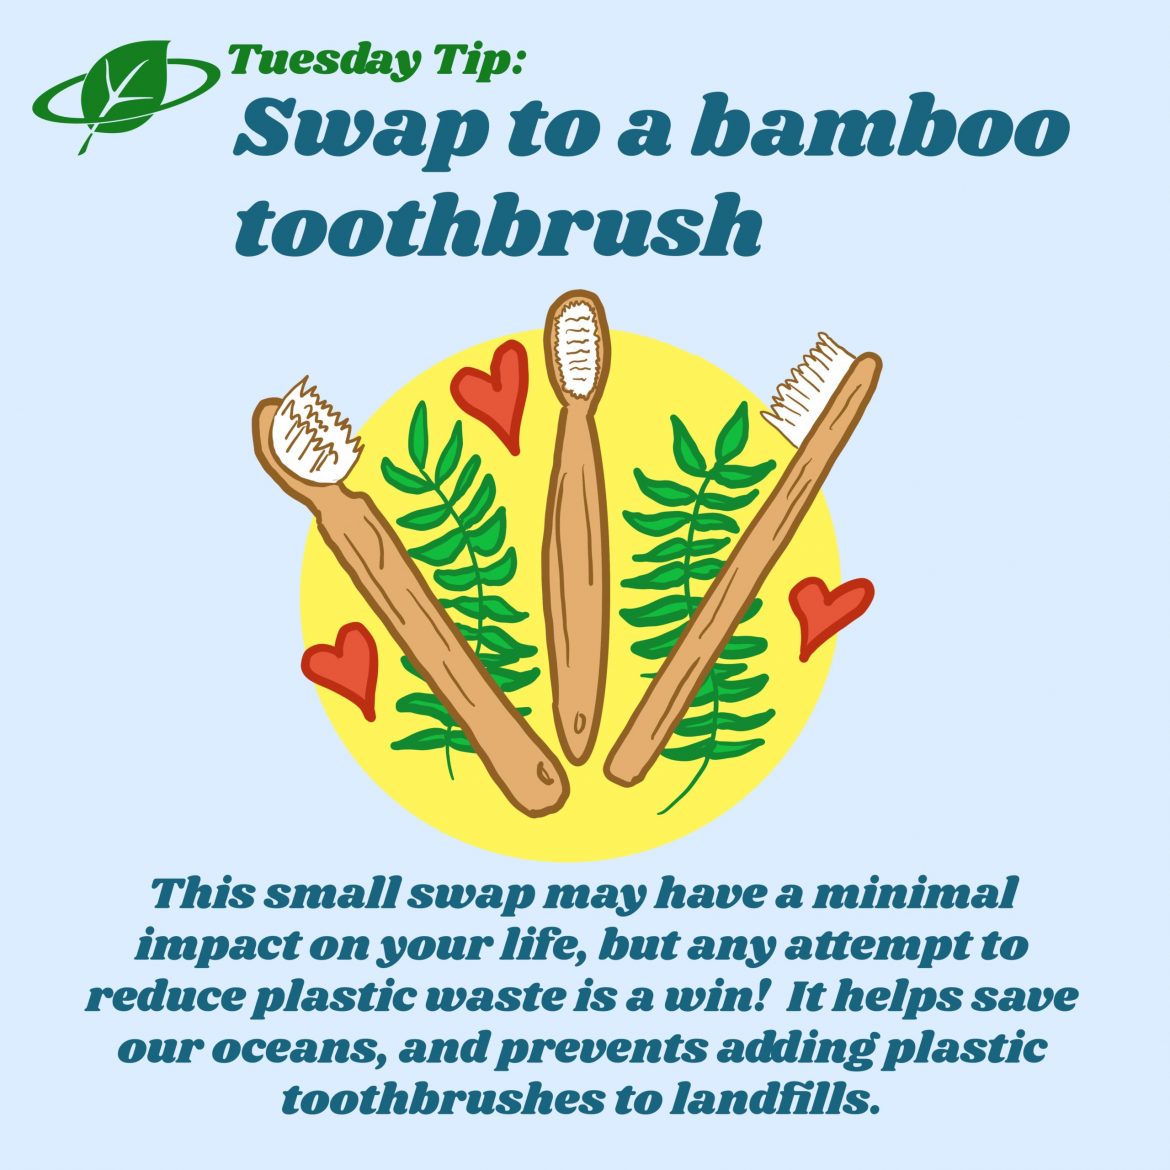 Swap to a bamboo toothbrush | Tuesday Tip